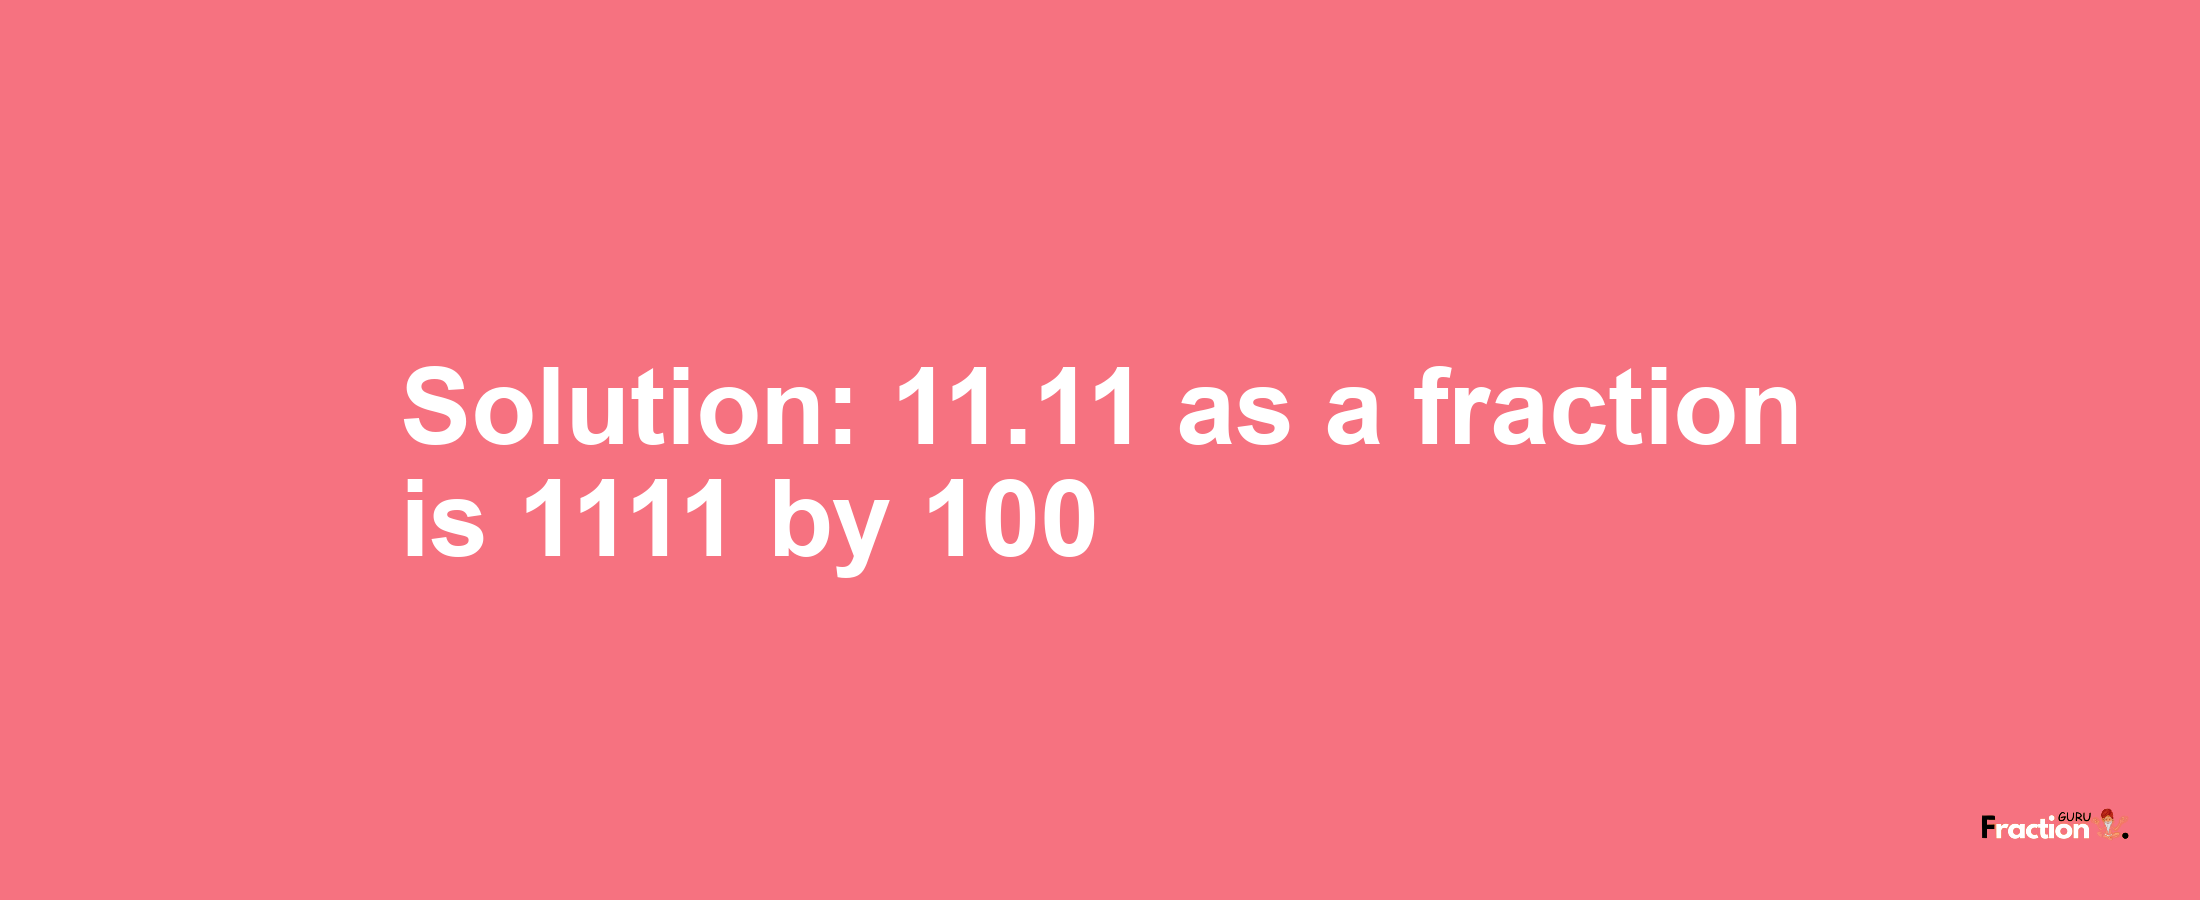 Solution:11.11 as a fraction is 1111/100